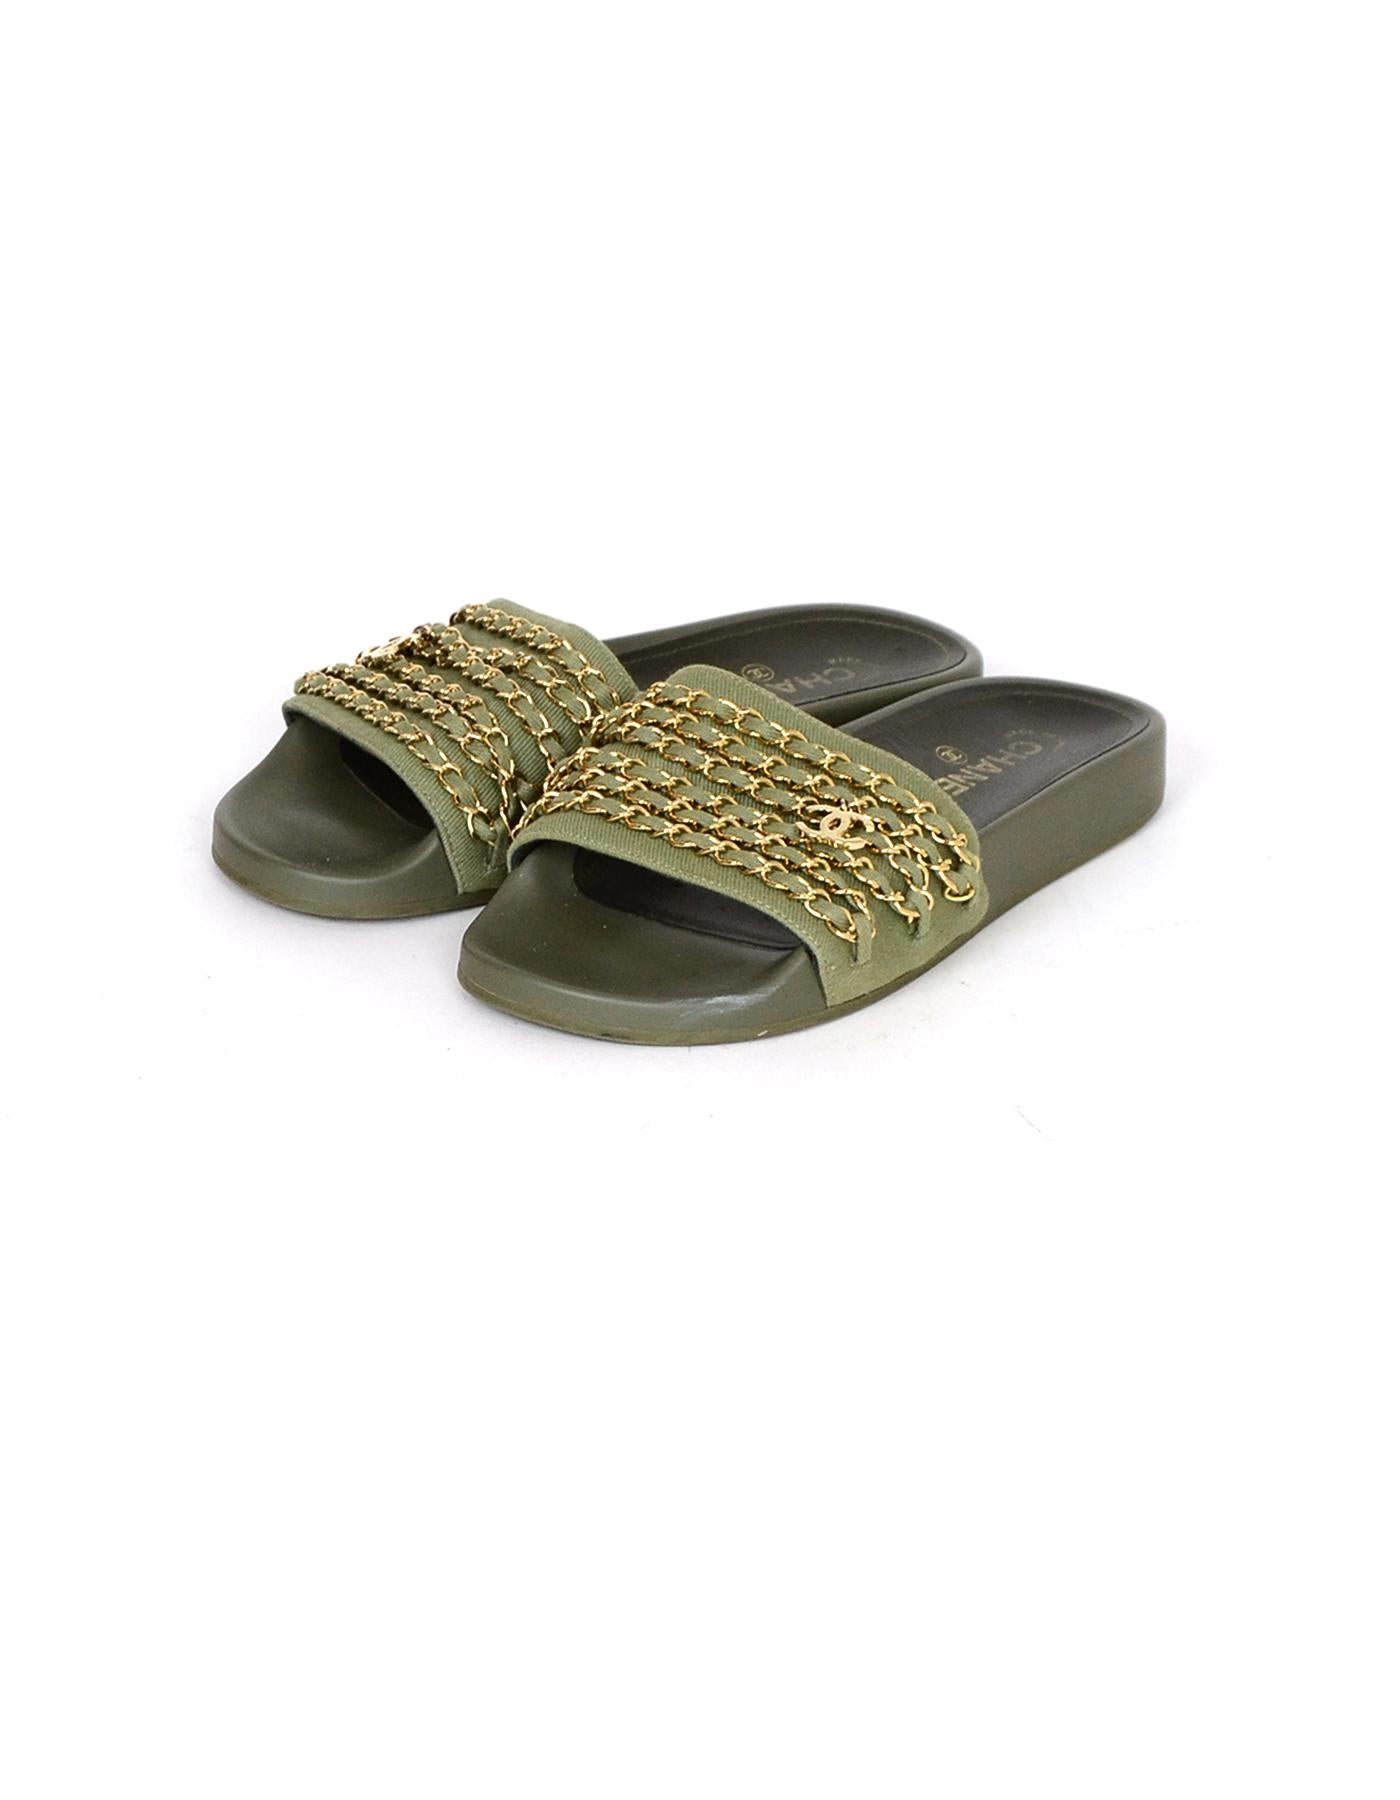 Chanel Olive Green/Gold Canvas Chain Slide Sandals w/ CC

Made In: Italy
Color: Olive green, gold
Hardware: Goldtone
Materials: Leather, canvas, rubber
Closure/Opening: Slide on
Overall Condition: Excellent pre-owned condition, with the exception of